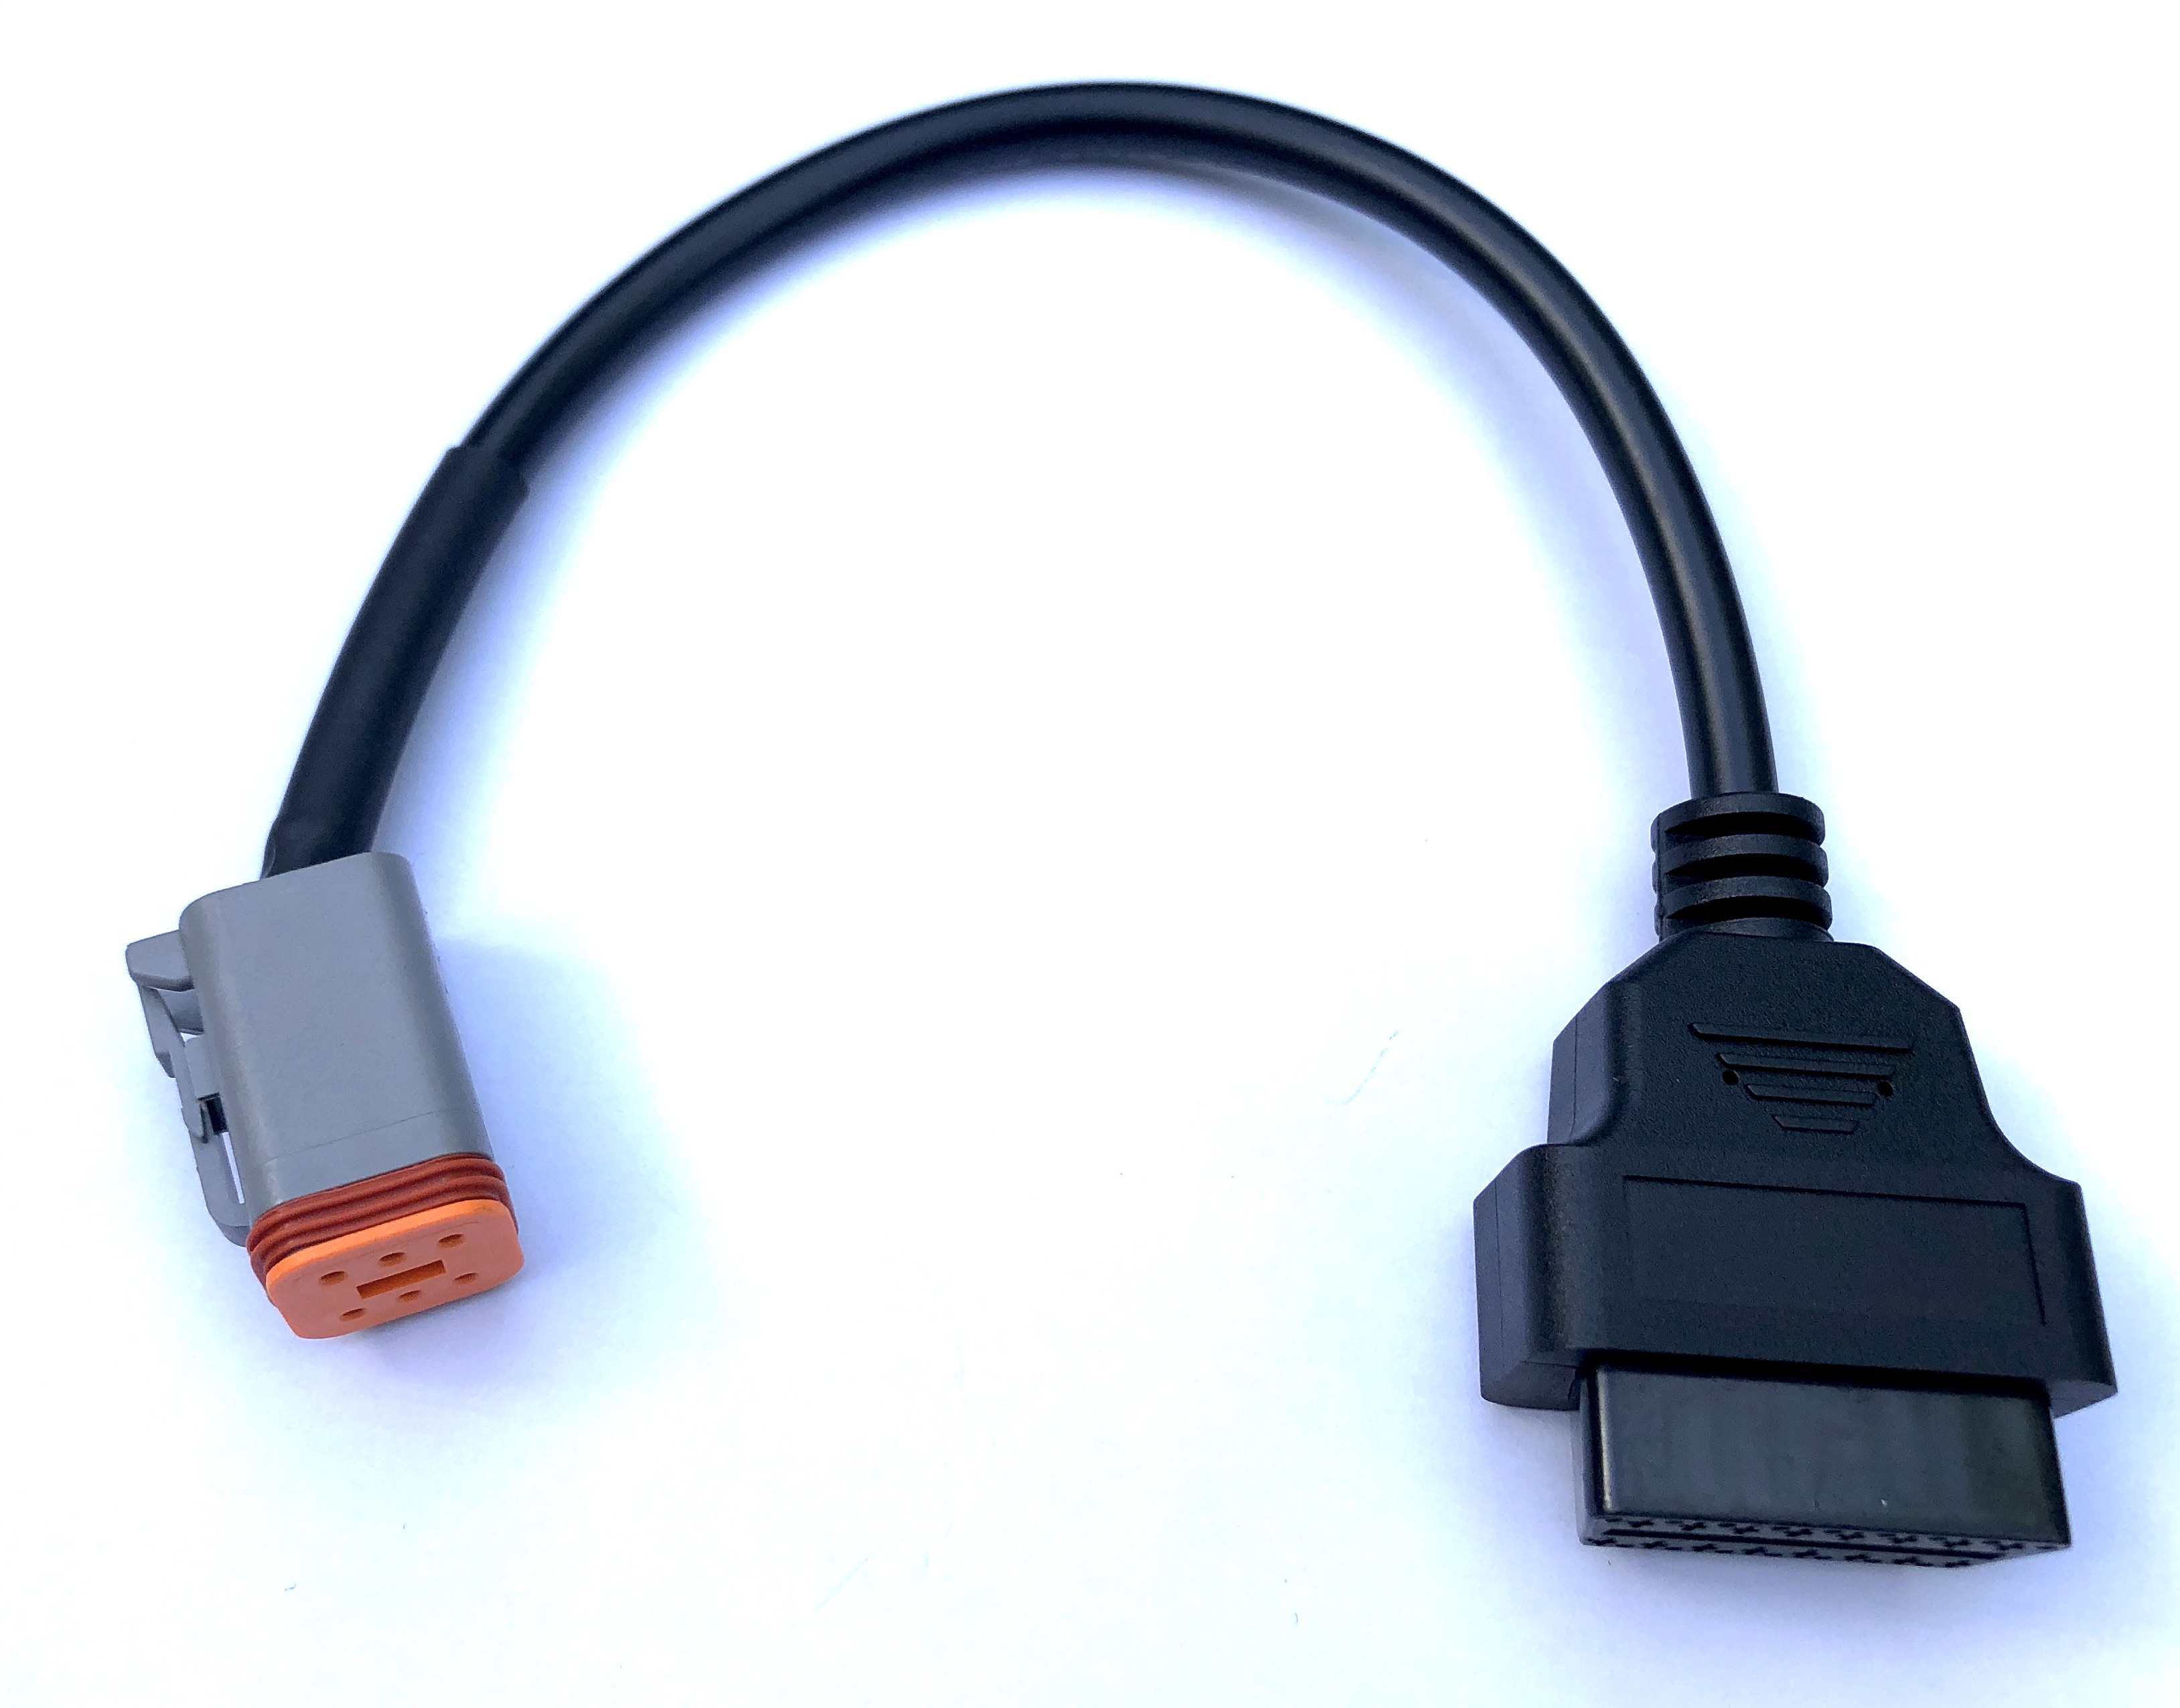 Harley Davidson 6 Pin OBD Diagnostic Cable Adapter